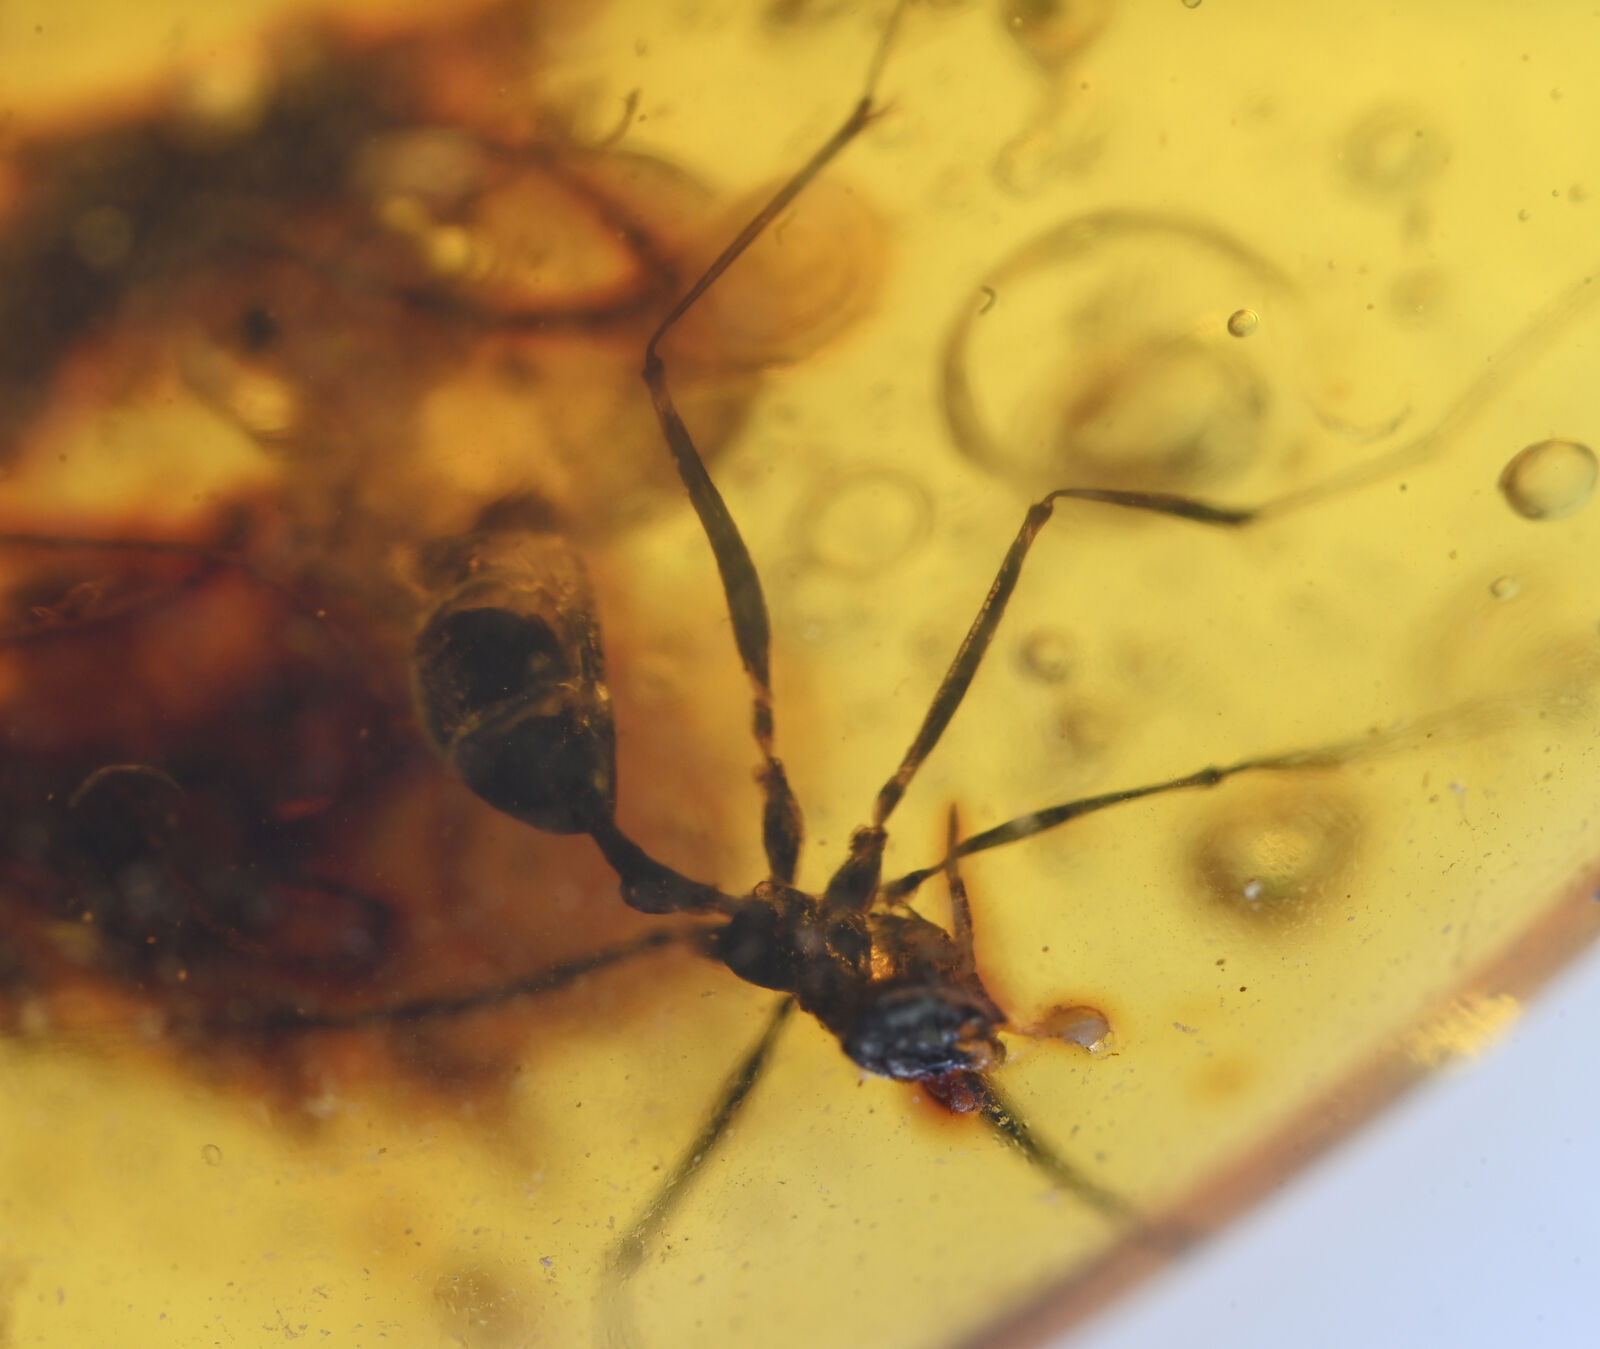 Extinct Sphecomyrma Ant, Fossil insect inclusion in Burmese Amber